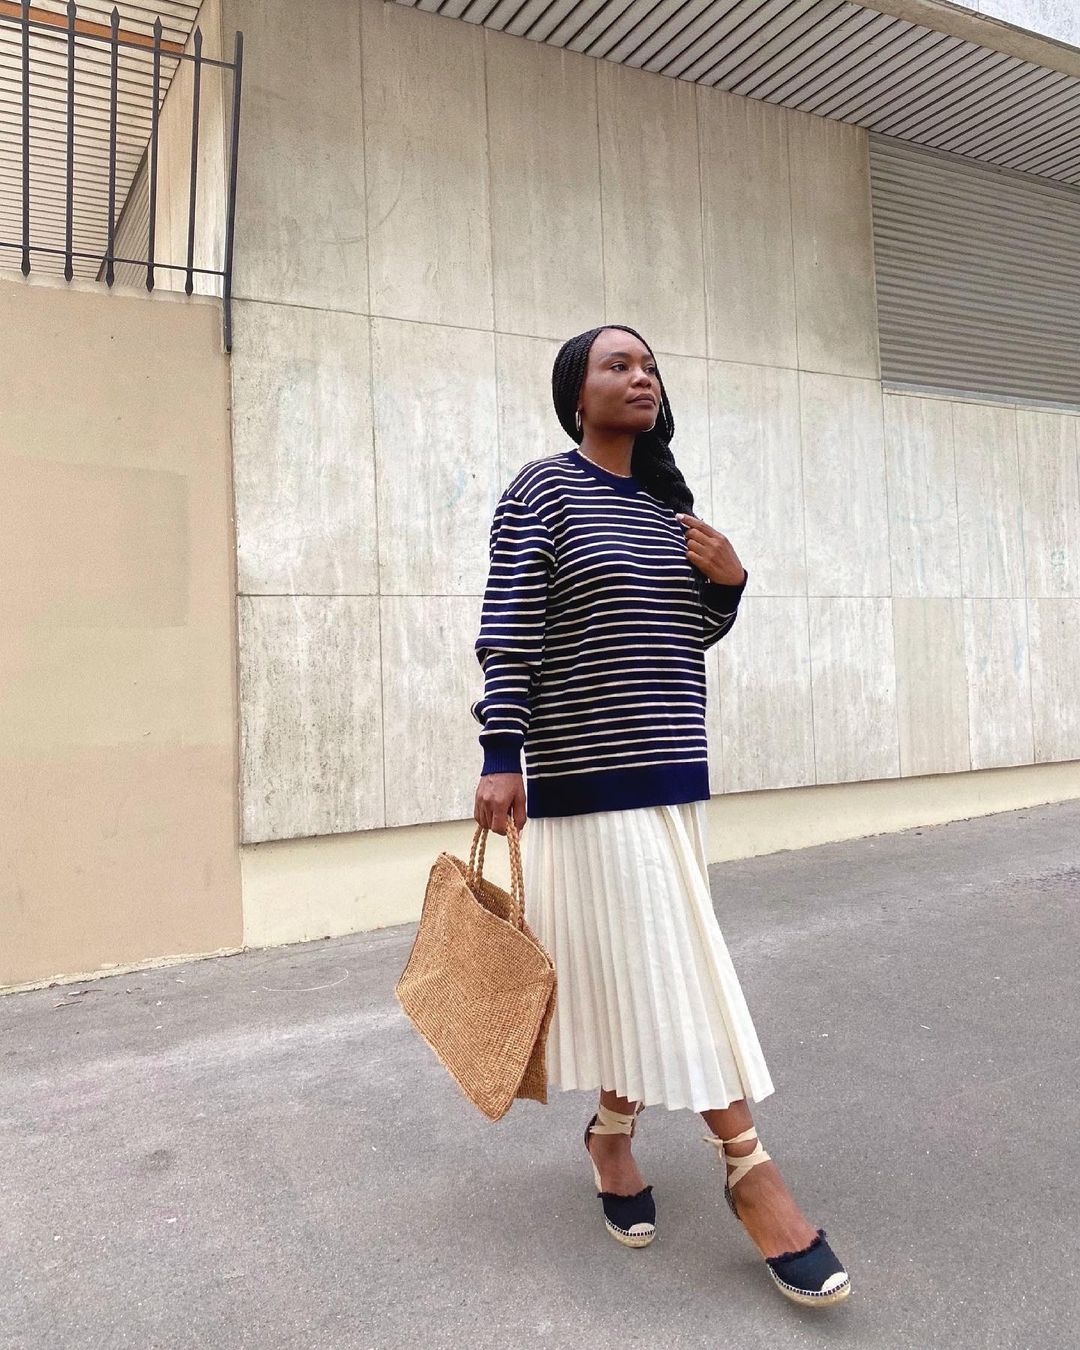 French Girl Spring Shoes: @frannfyne wears a pair of espadrilles